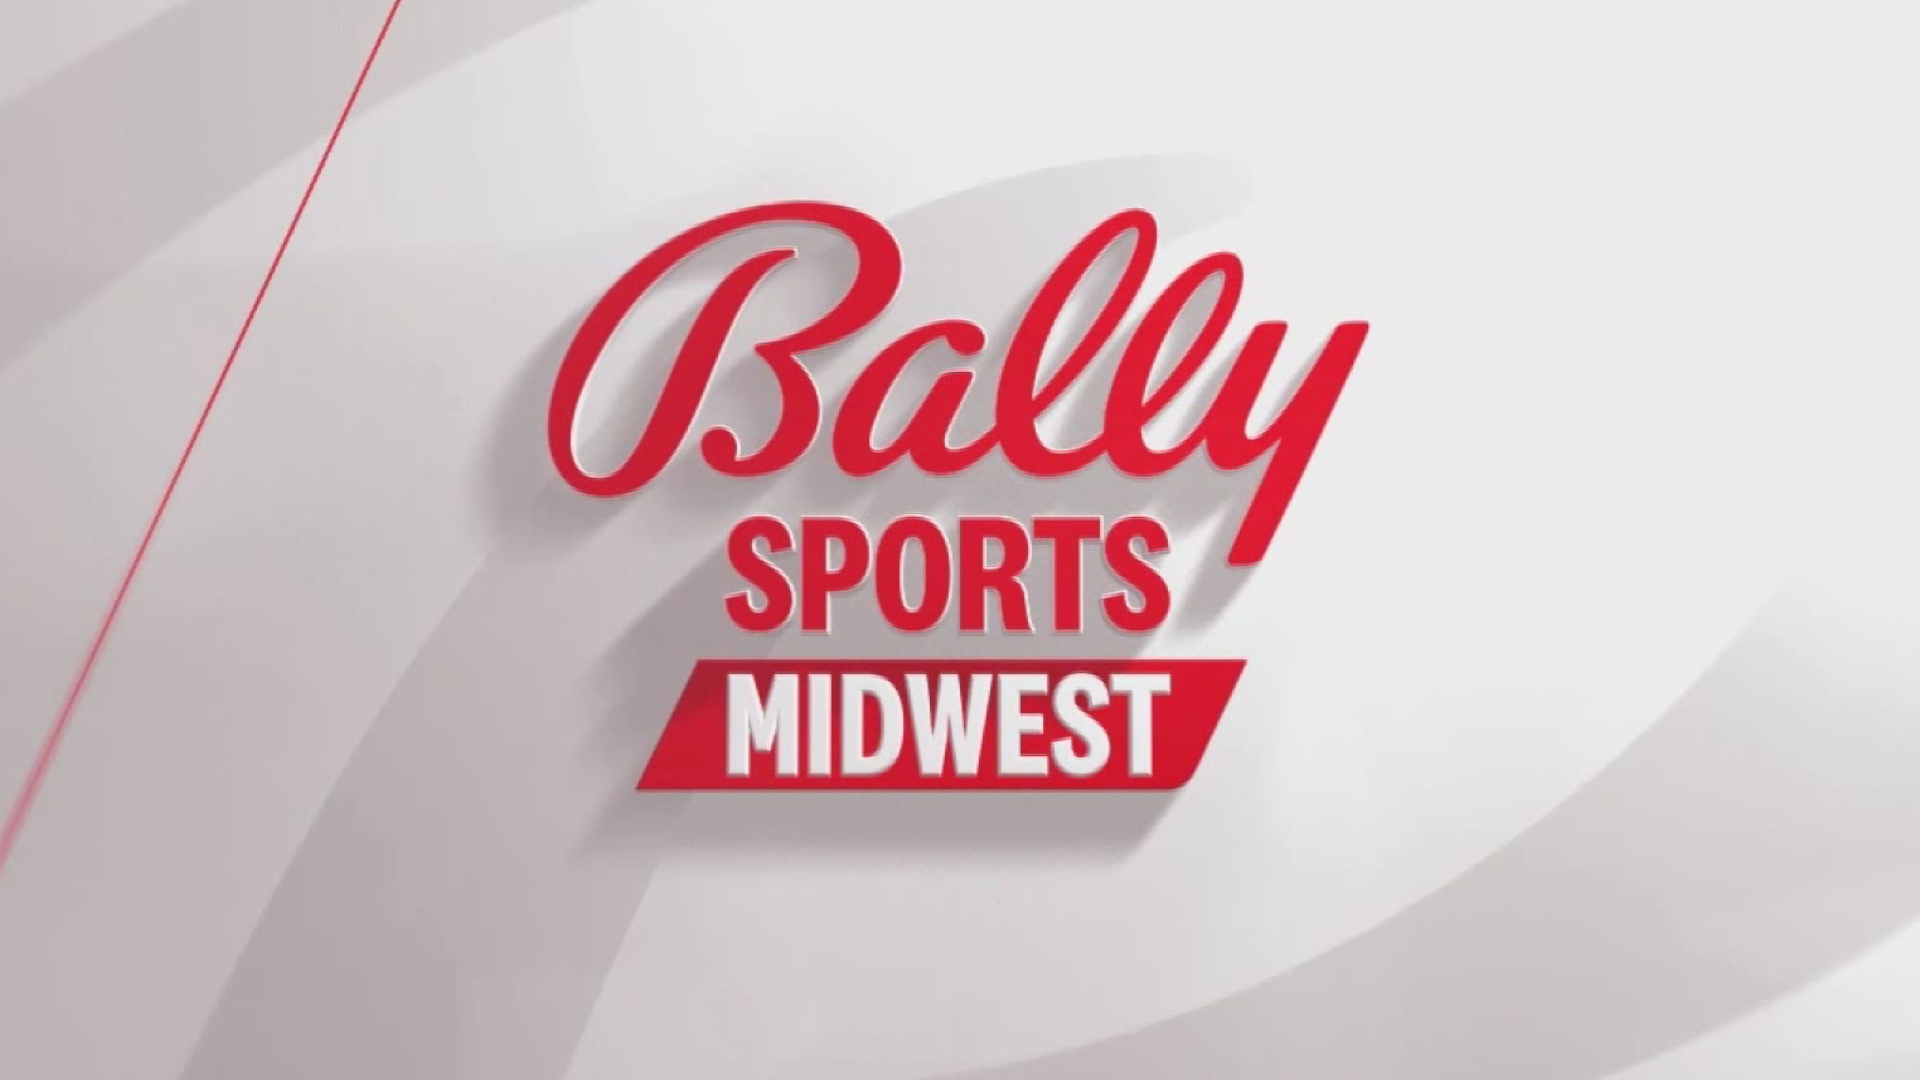 A new chapter | Fox Sports Midwest becomes Bally Sports Midwest | ksdk.com